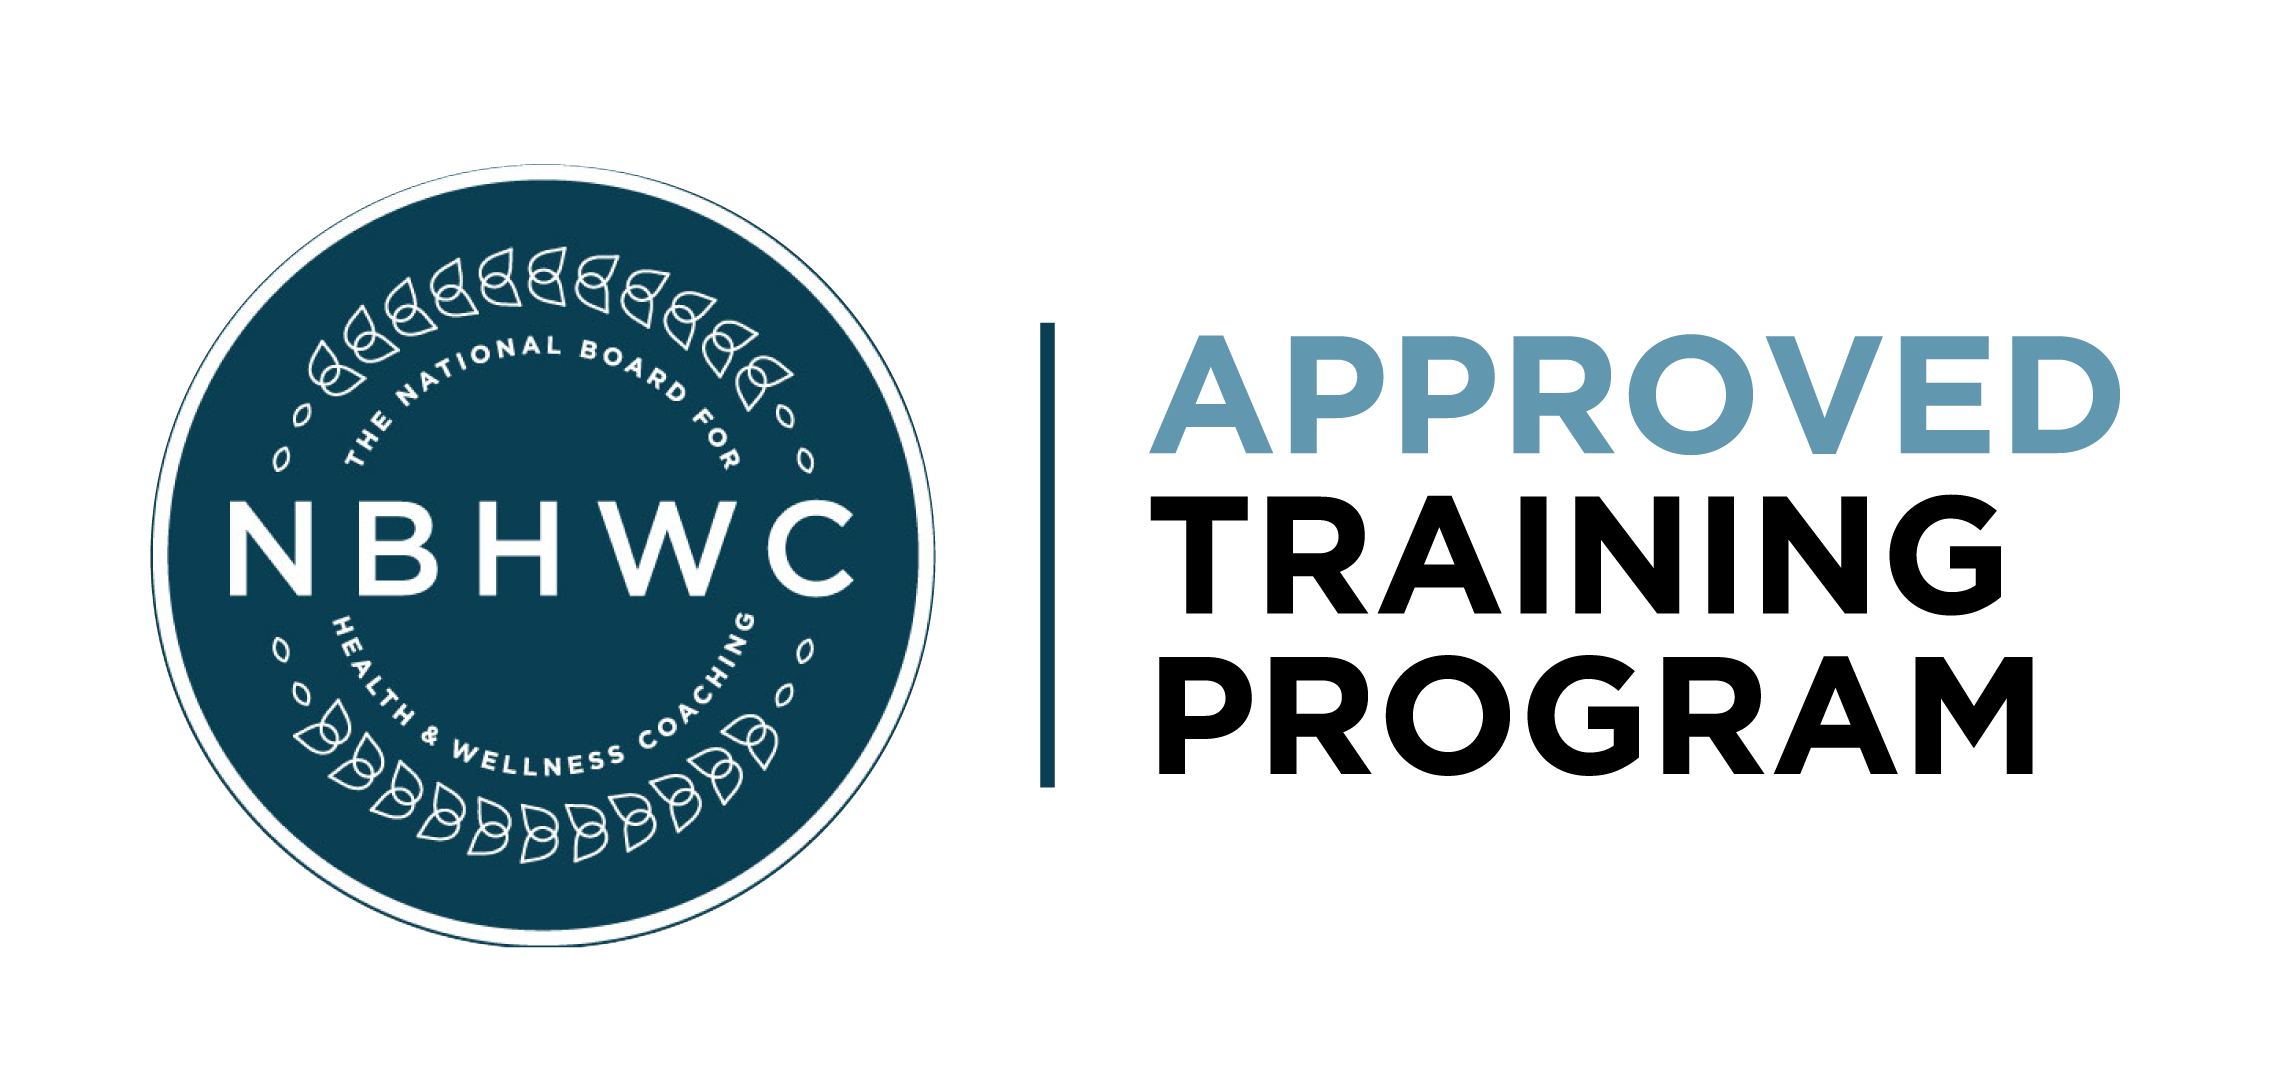 NBHWC The National Board for Health & Wellness Coaching approved training program